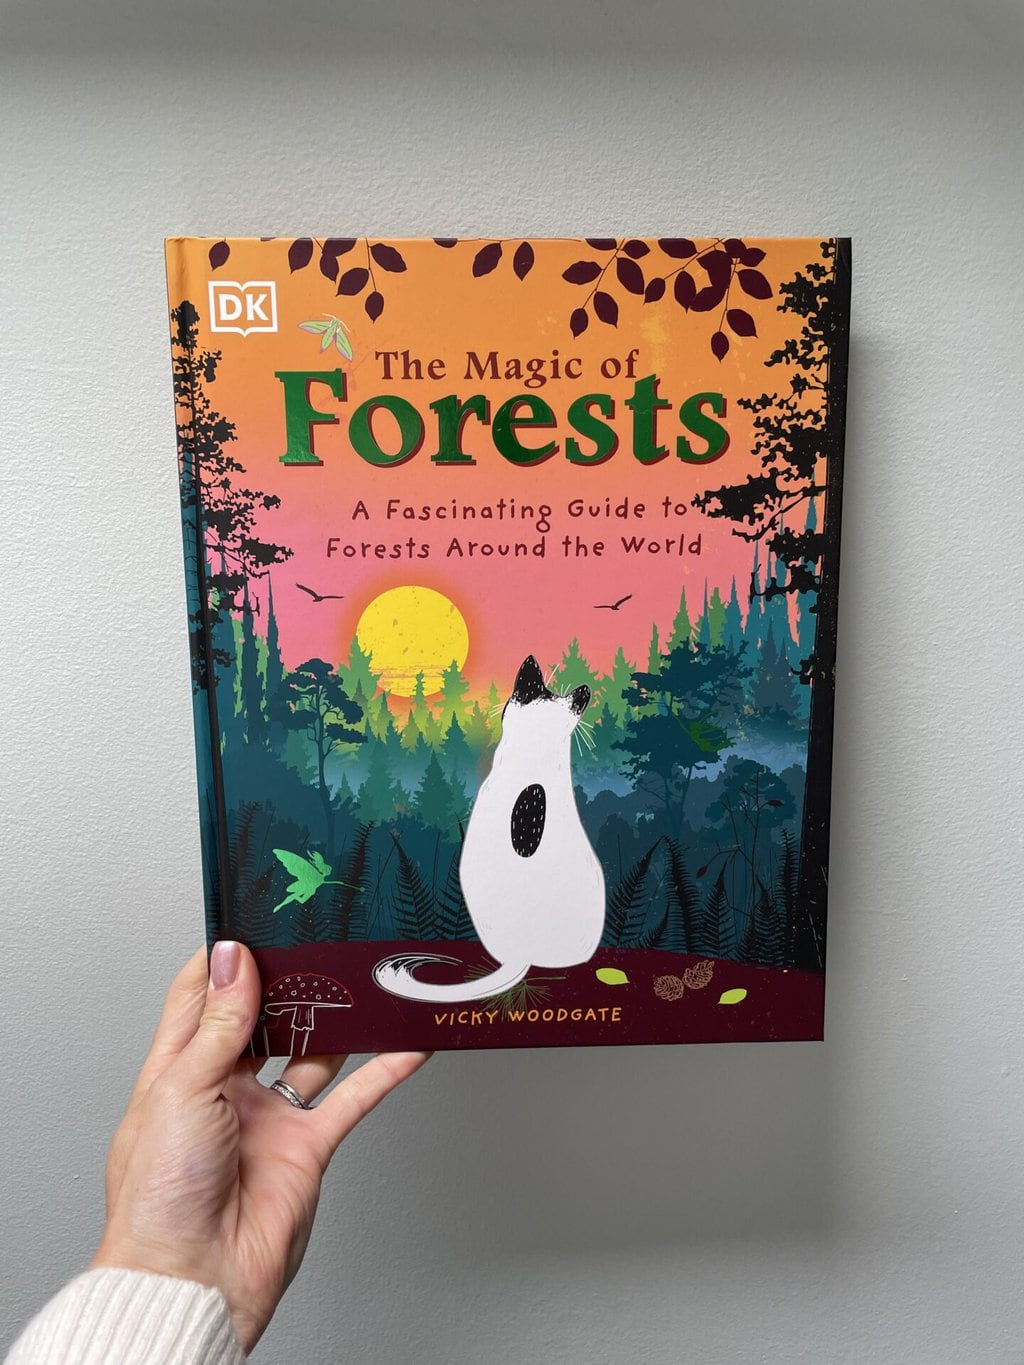 The Magic of Forests - Vicky Woodgate